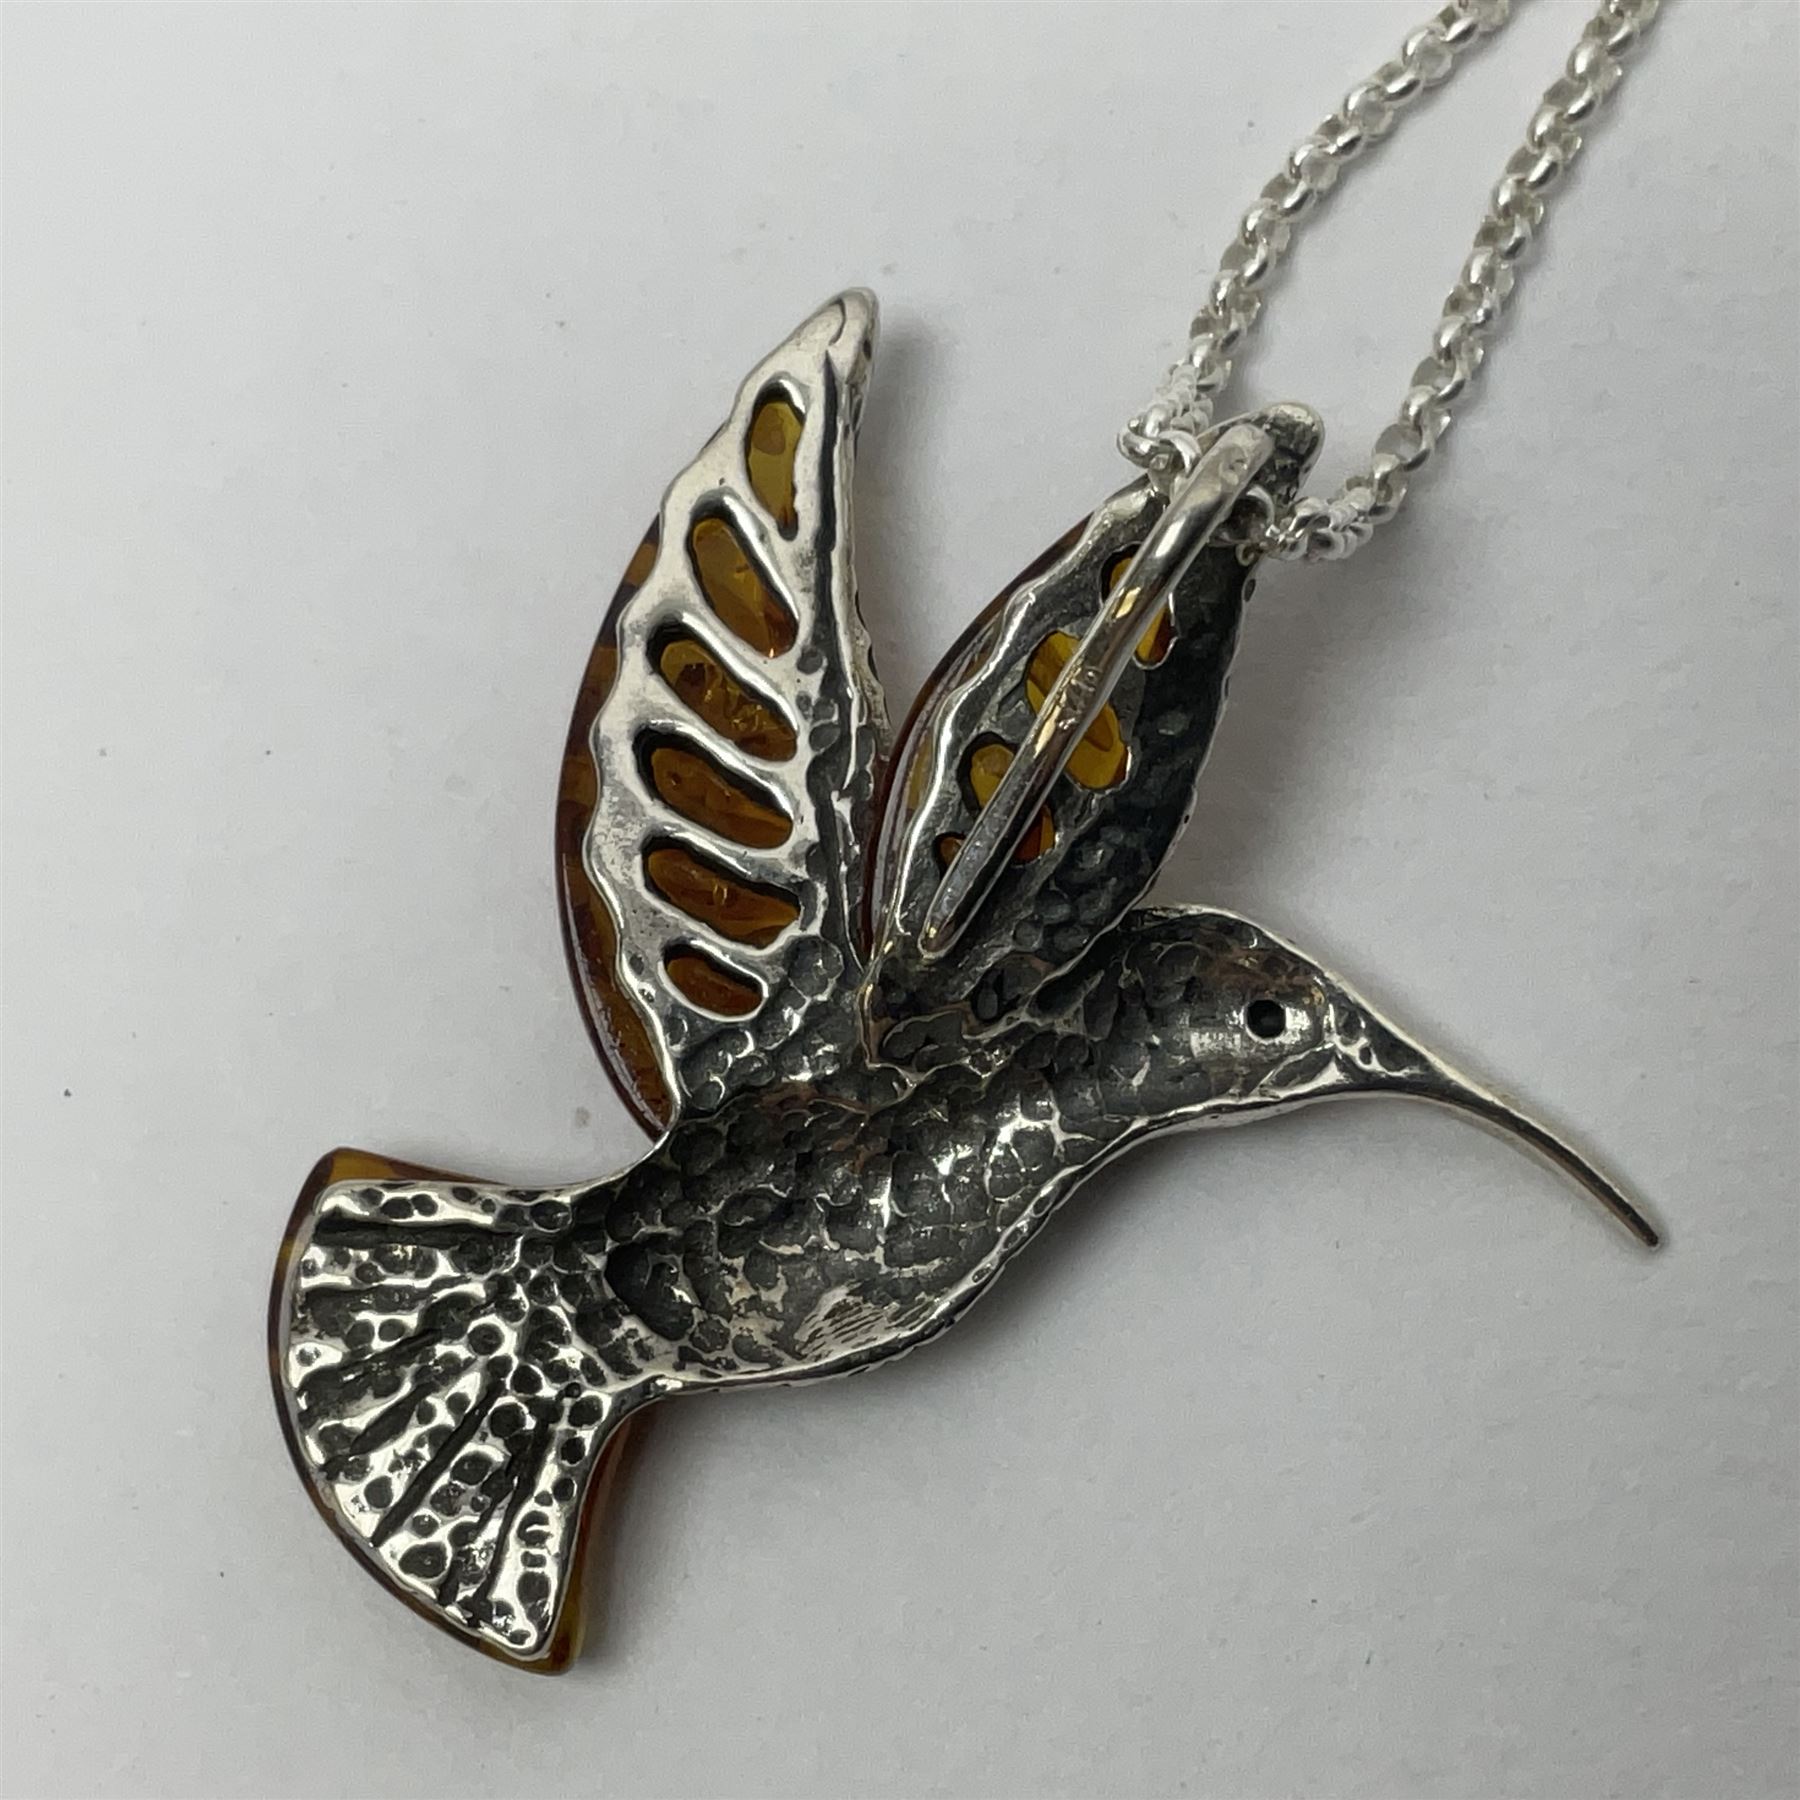 Silver Baltic amber hummingbird pendant necklace - Image 3 of 4